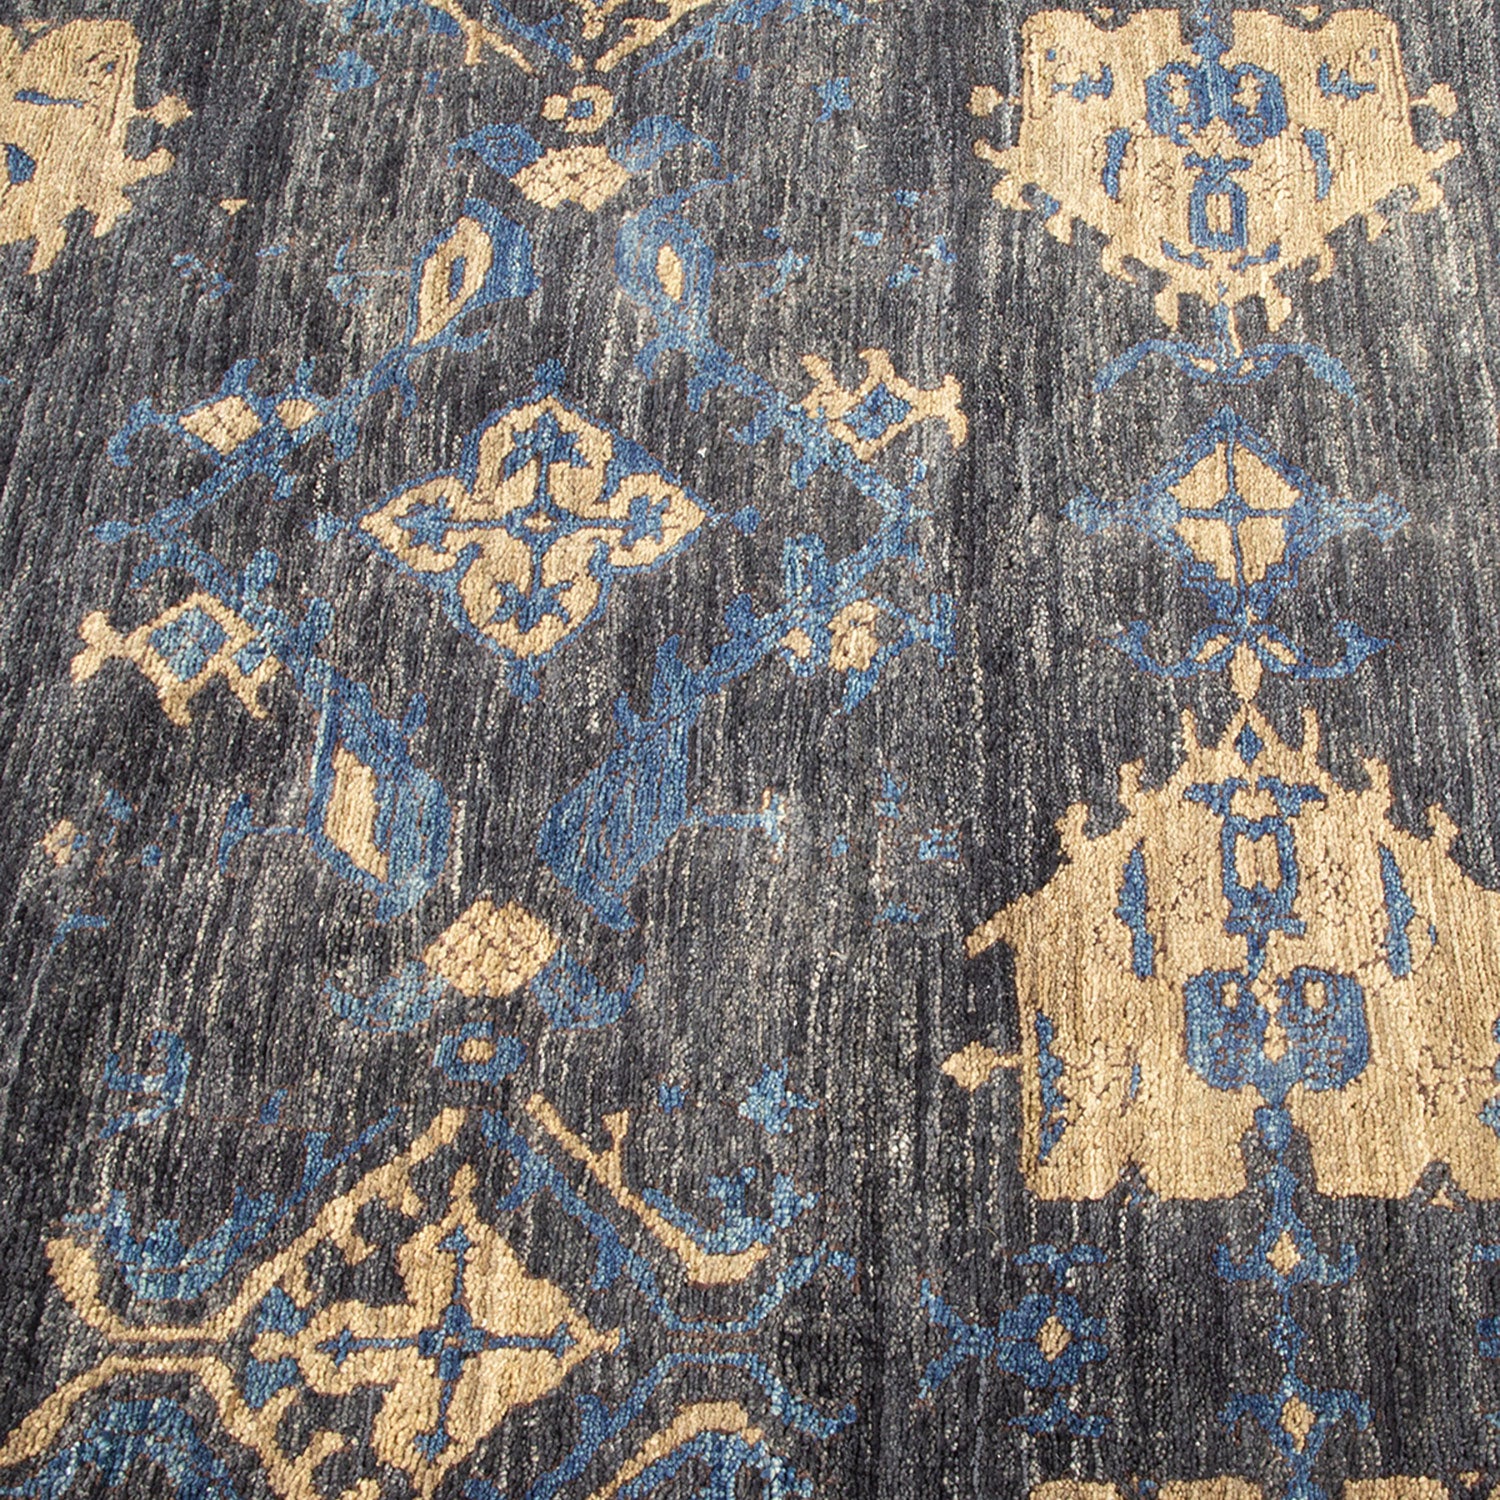 Intricately designed Middle Eastern-inspired rug with vintage aesthetic.